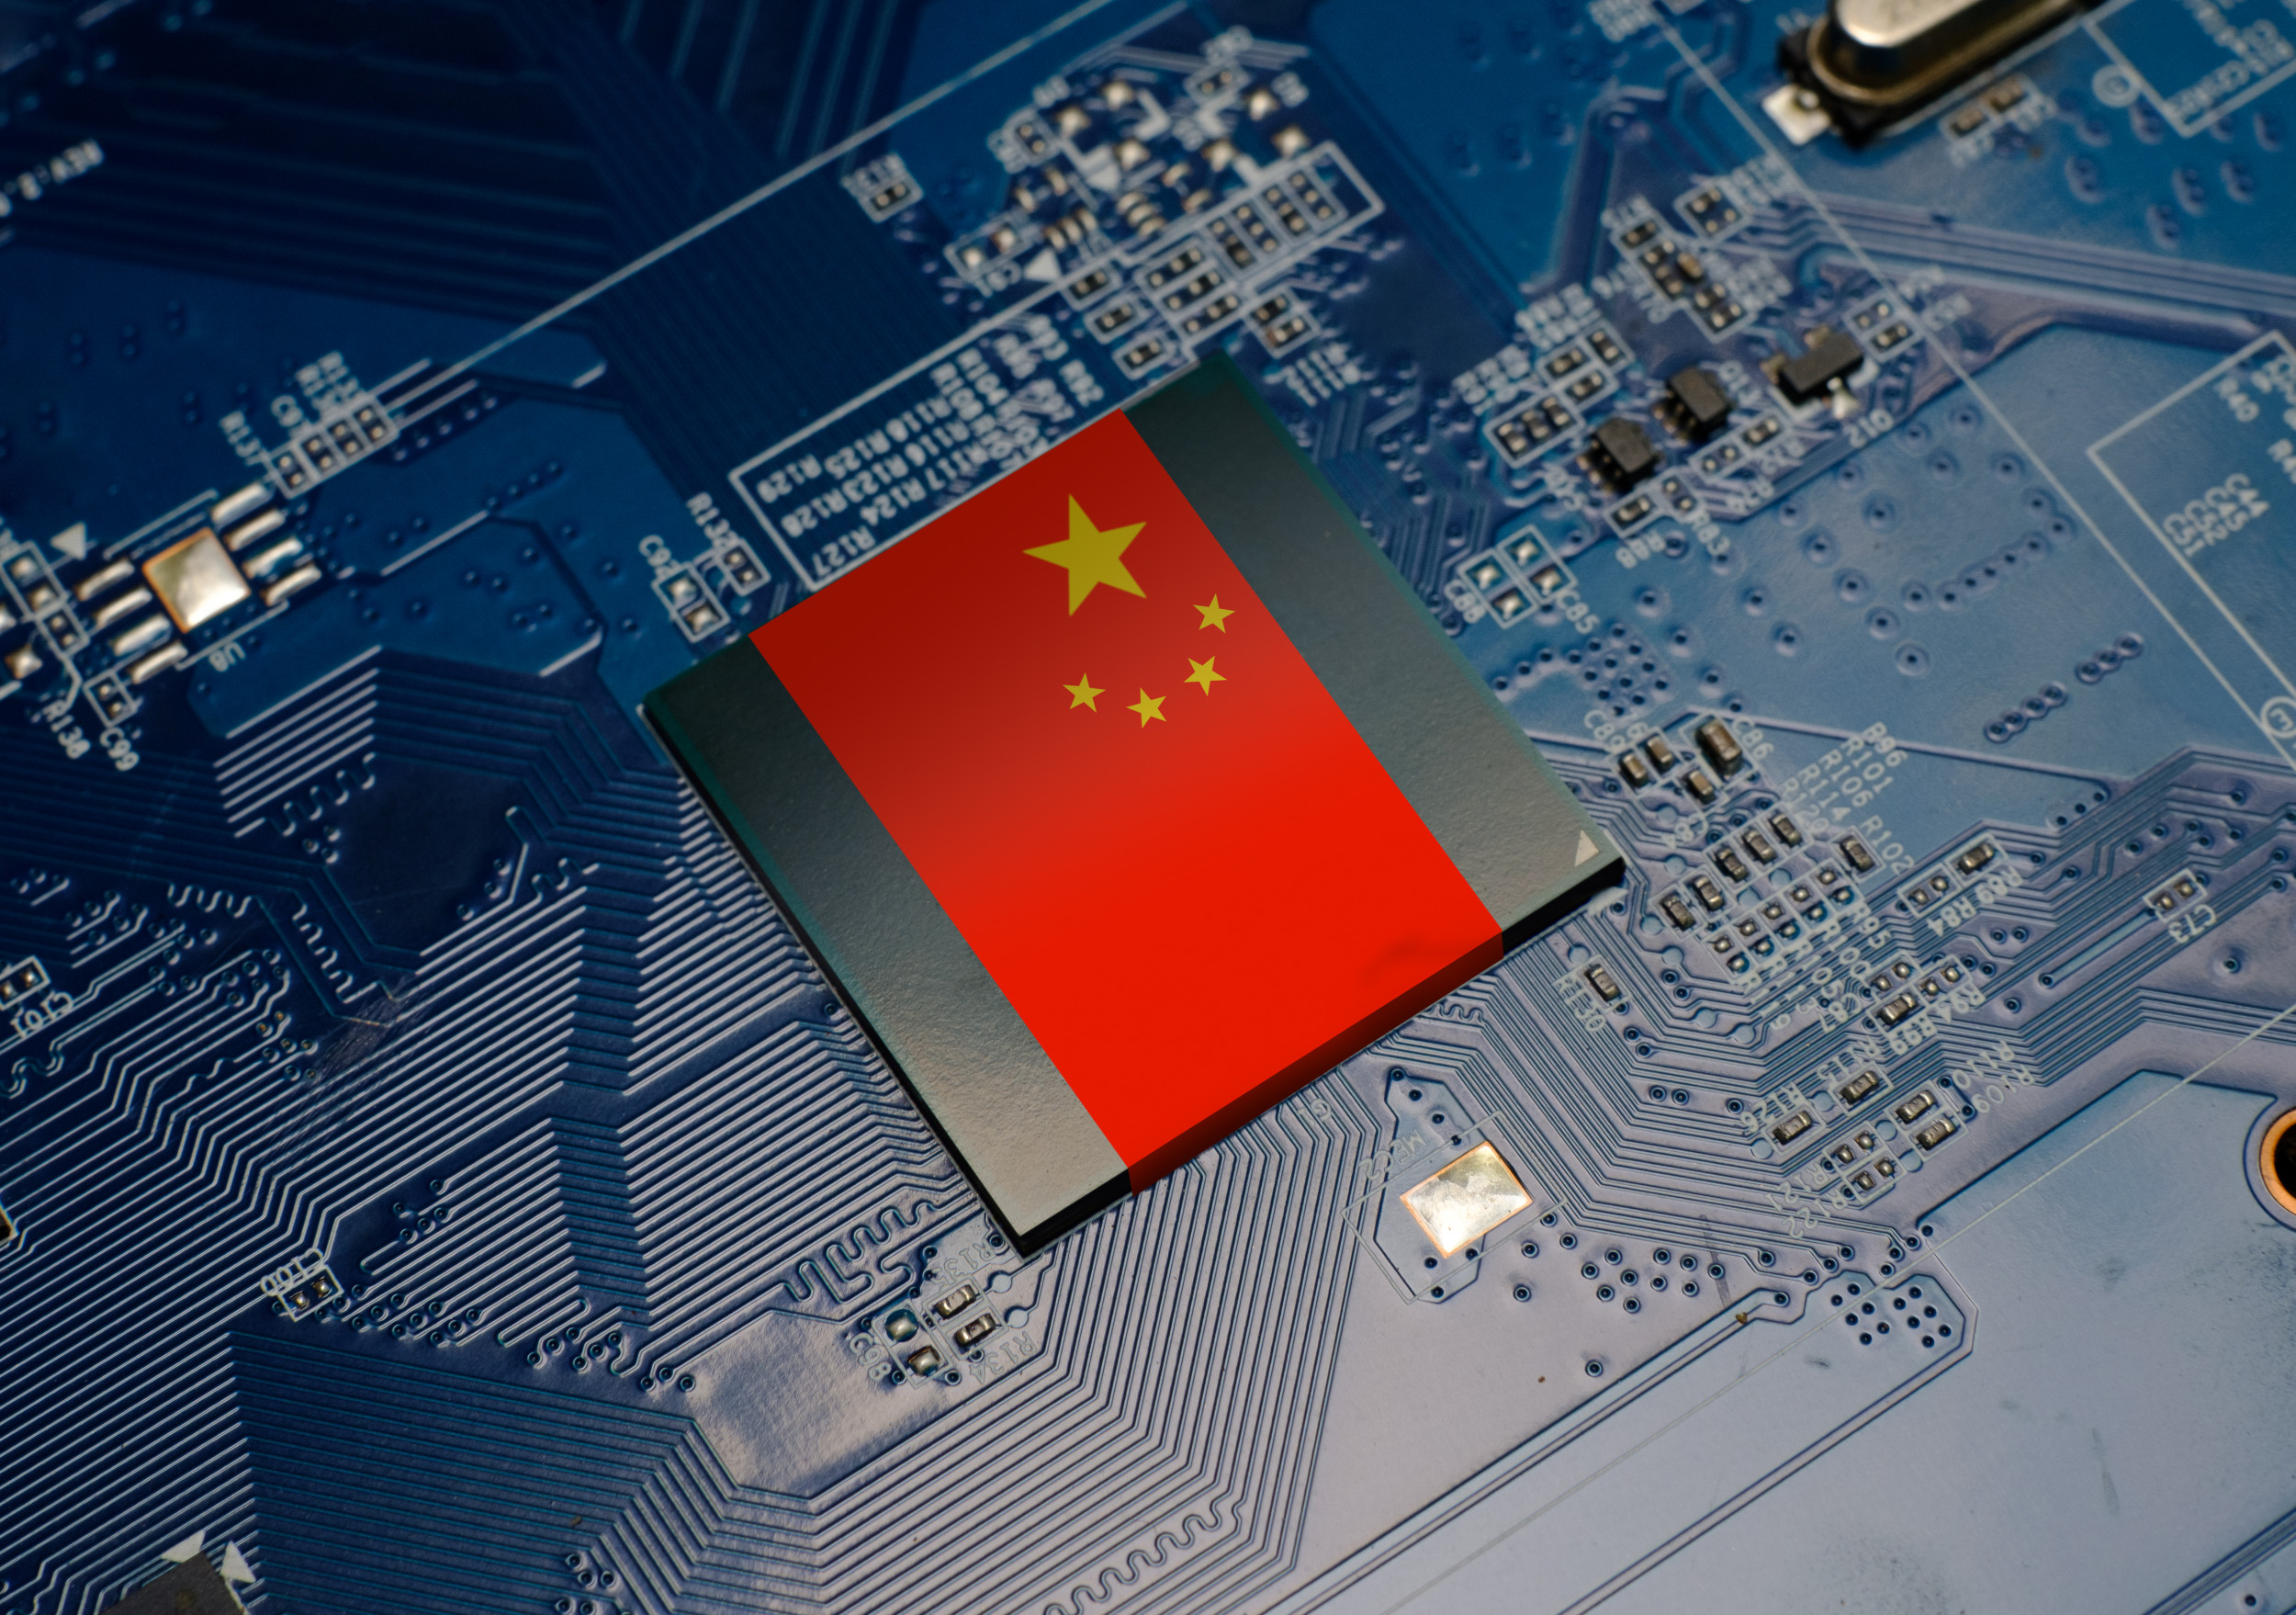  A computer chip with the flag of China on it, symbolizing the Chinese government's push to use domestic processors in its computers.